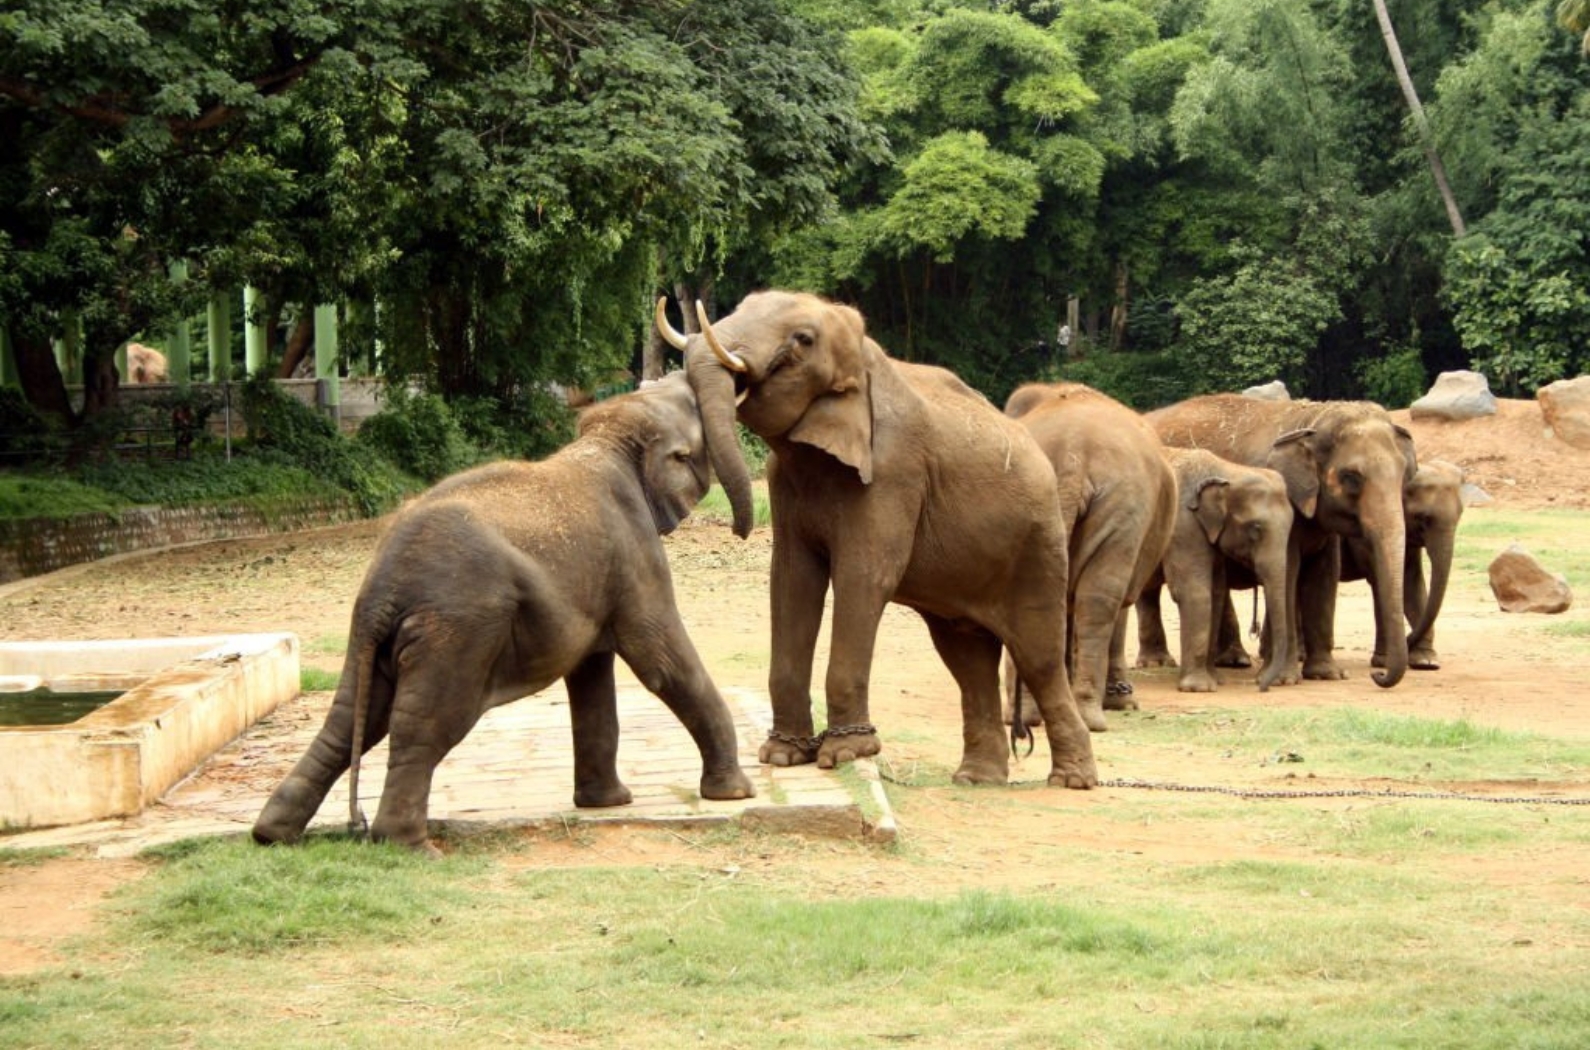 Two elephants are playing with other elephants in background.